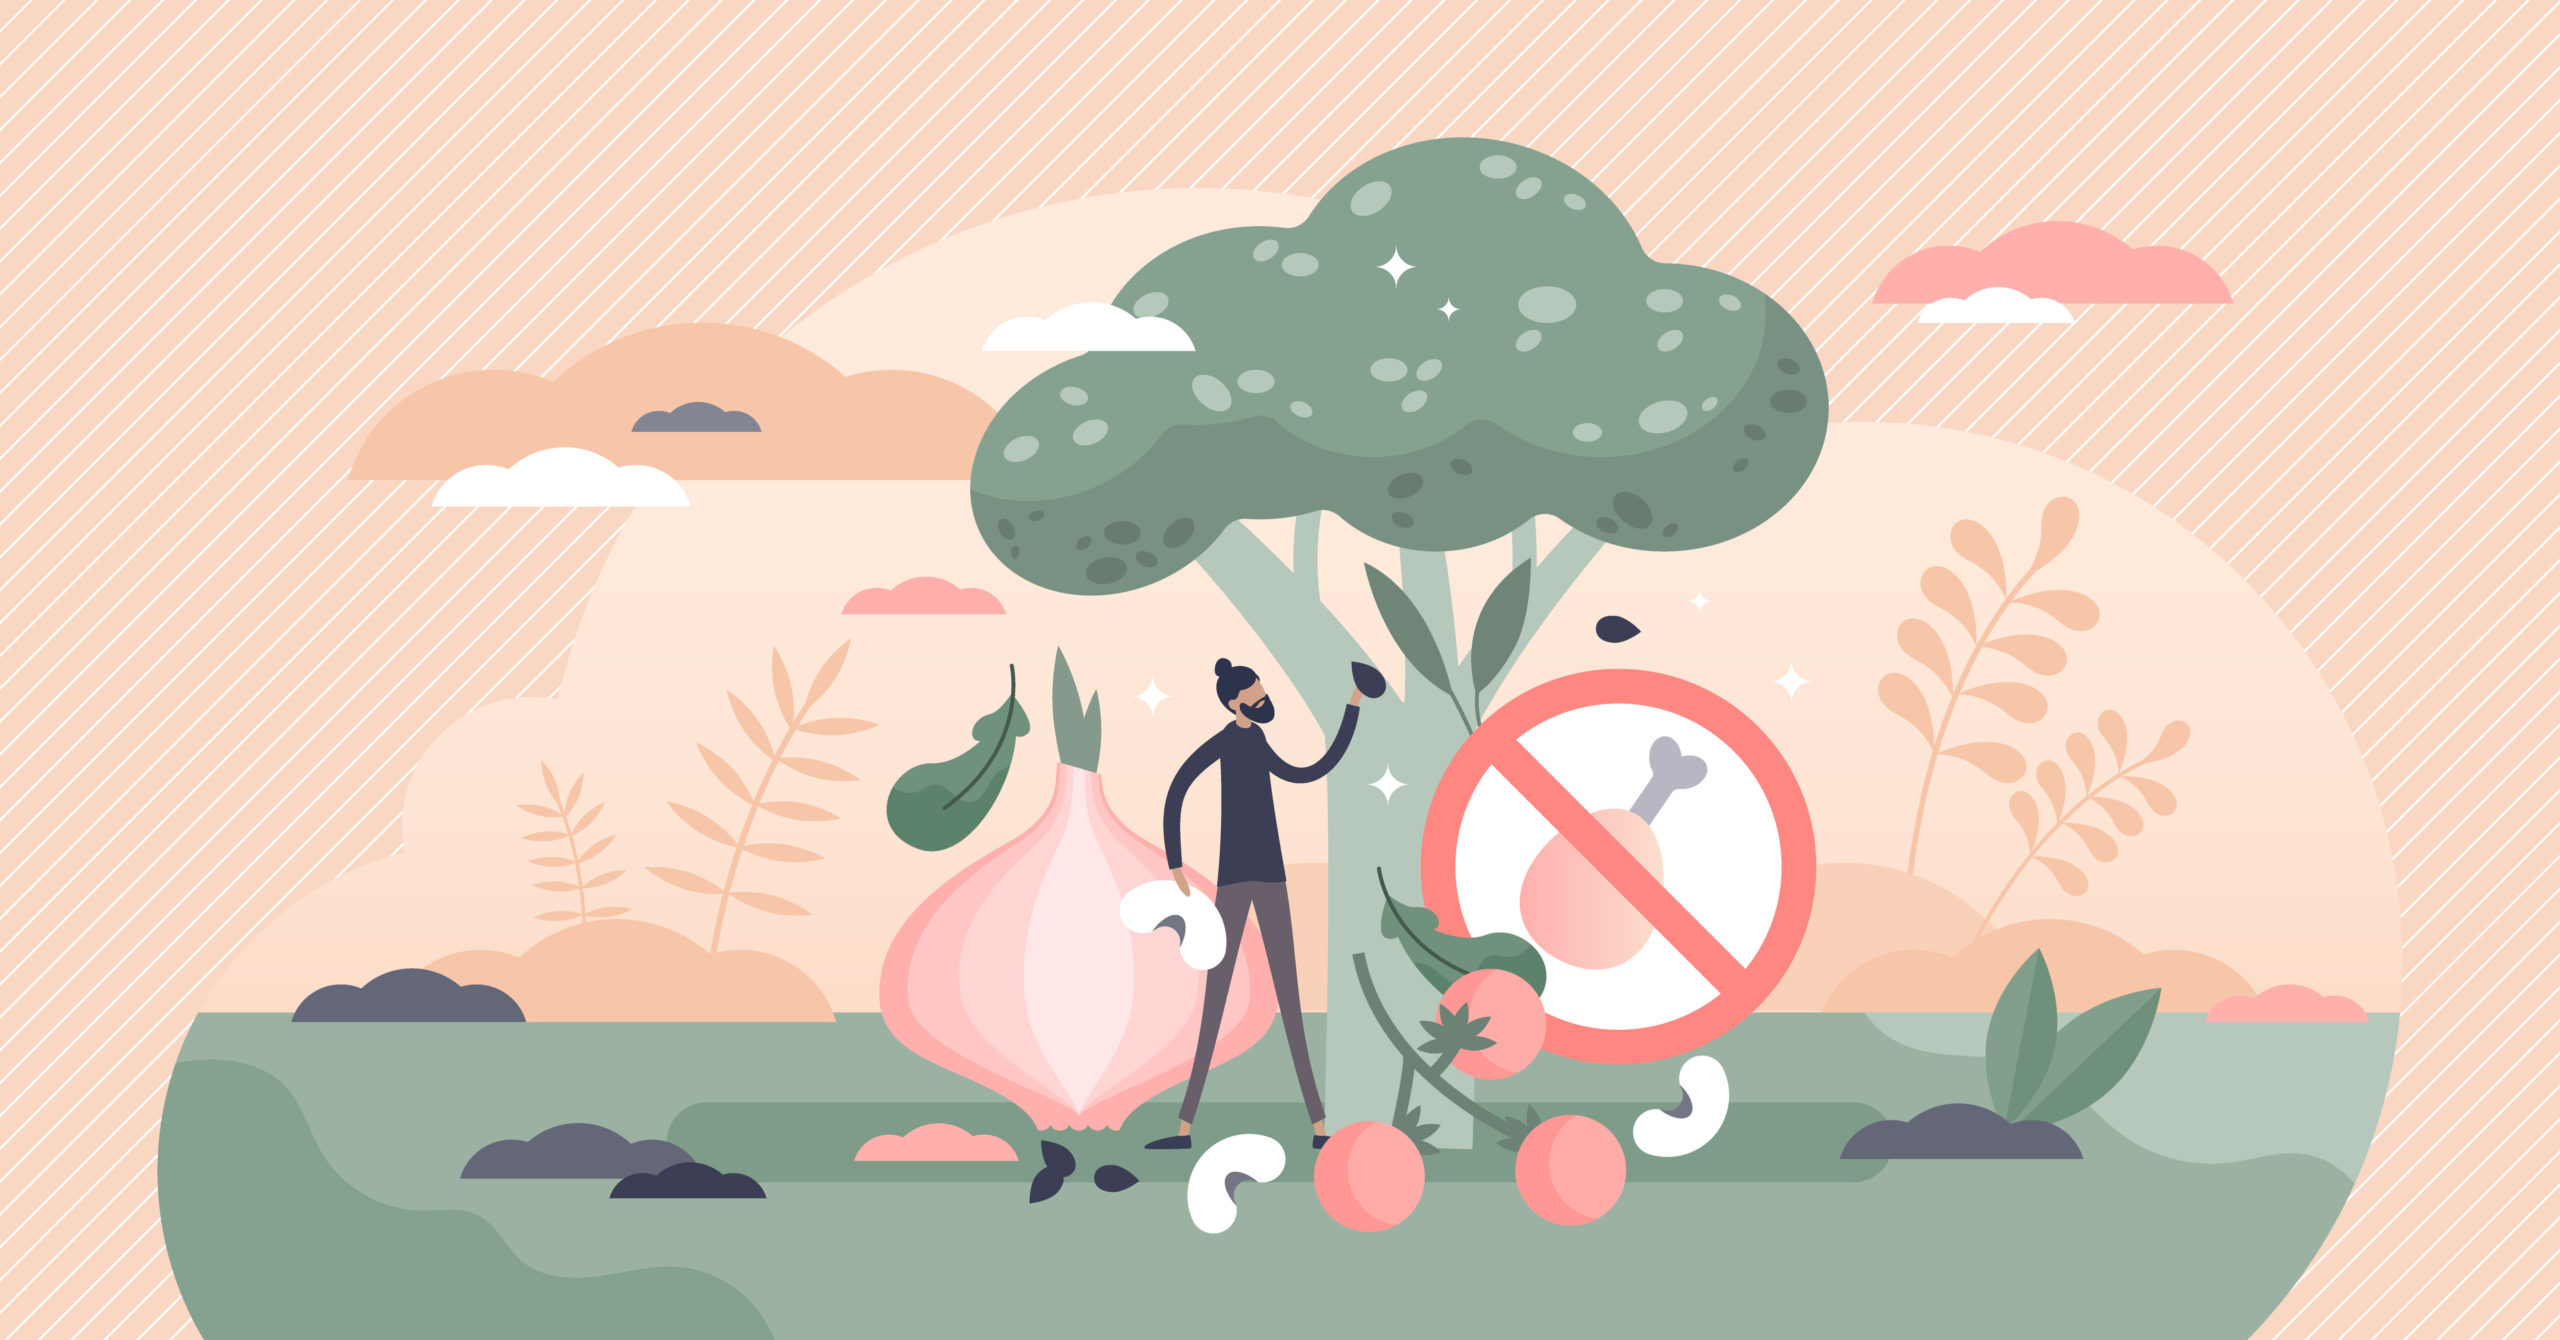 Vegan vegetable diet lifestyle with meat food exclusion tiny person concept. No animal products sign with nearby broccoli as healthy nutrition symbol vector illustration. Natural and raw menu catering